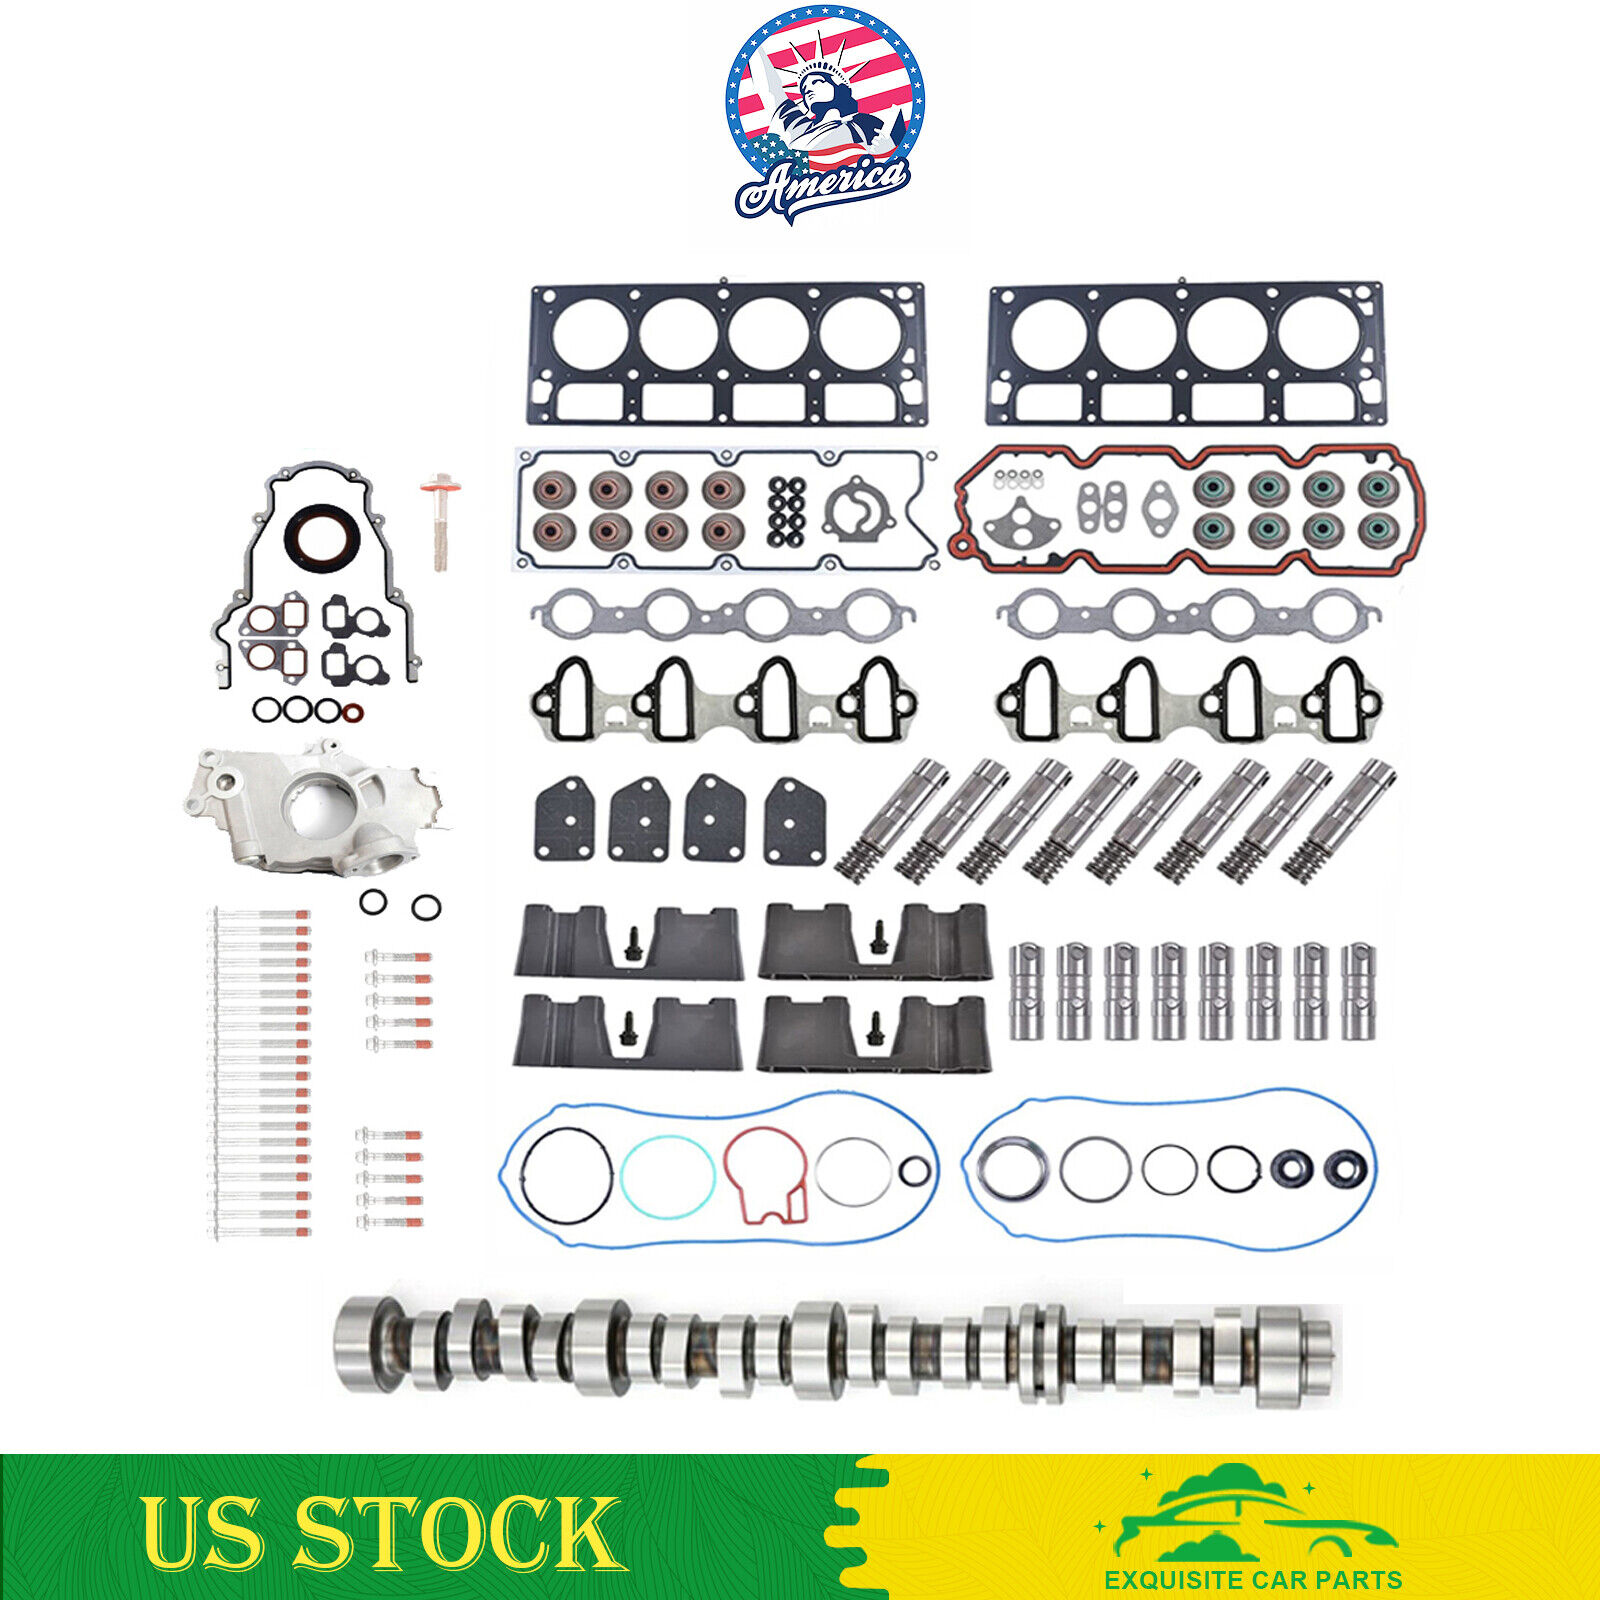 For Chevy GM 5.3L AFM Lifter Replacement Kit Camshaft Oil Pump Gasket Set